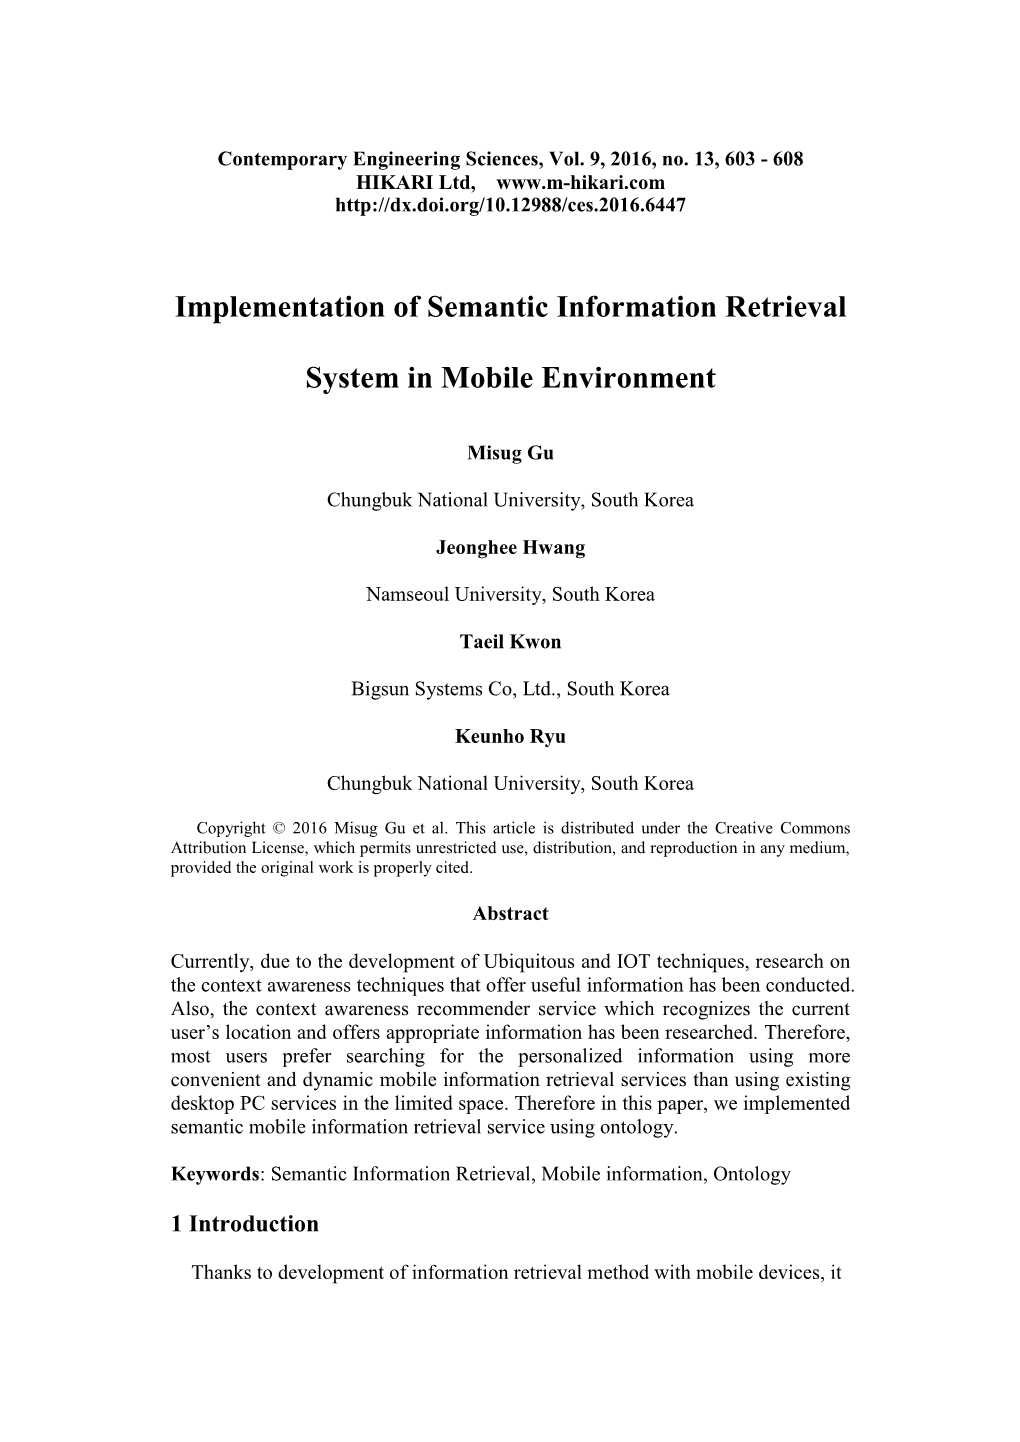 Implementation of Semantic Information Retrieval System In